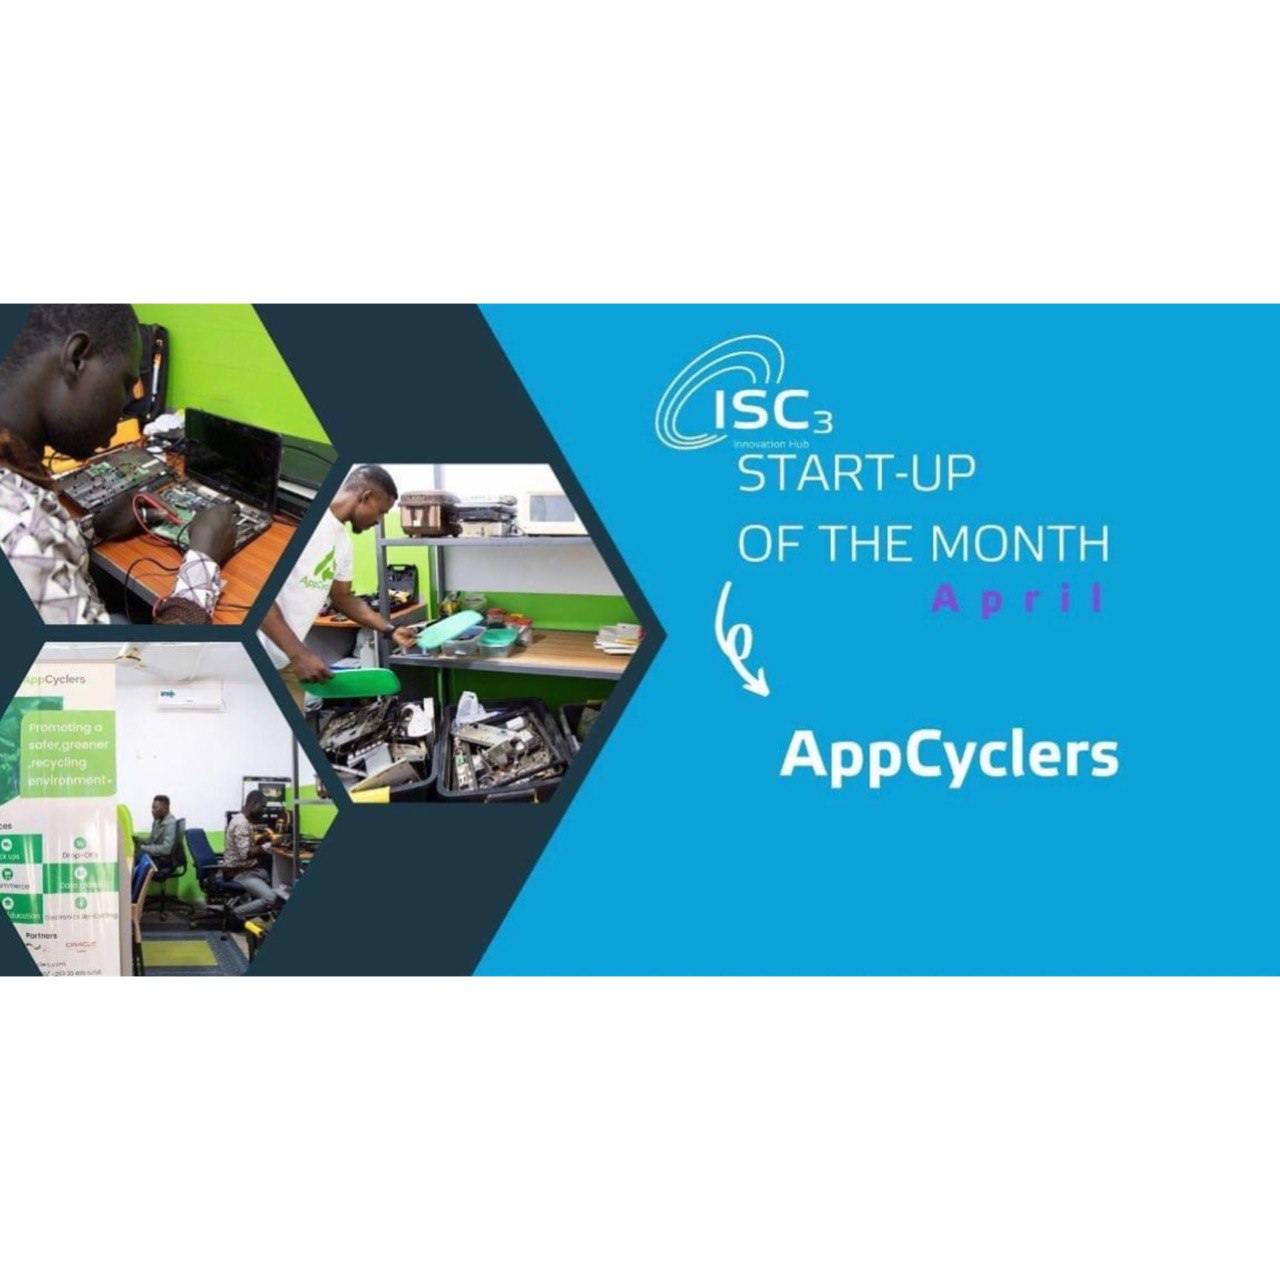 ISC3’s Startup of the Month for April 2023